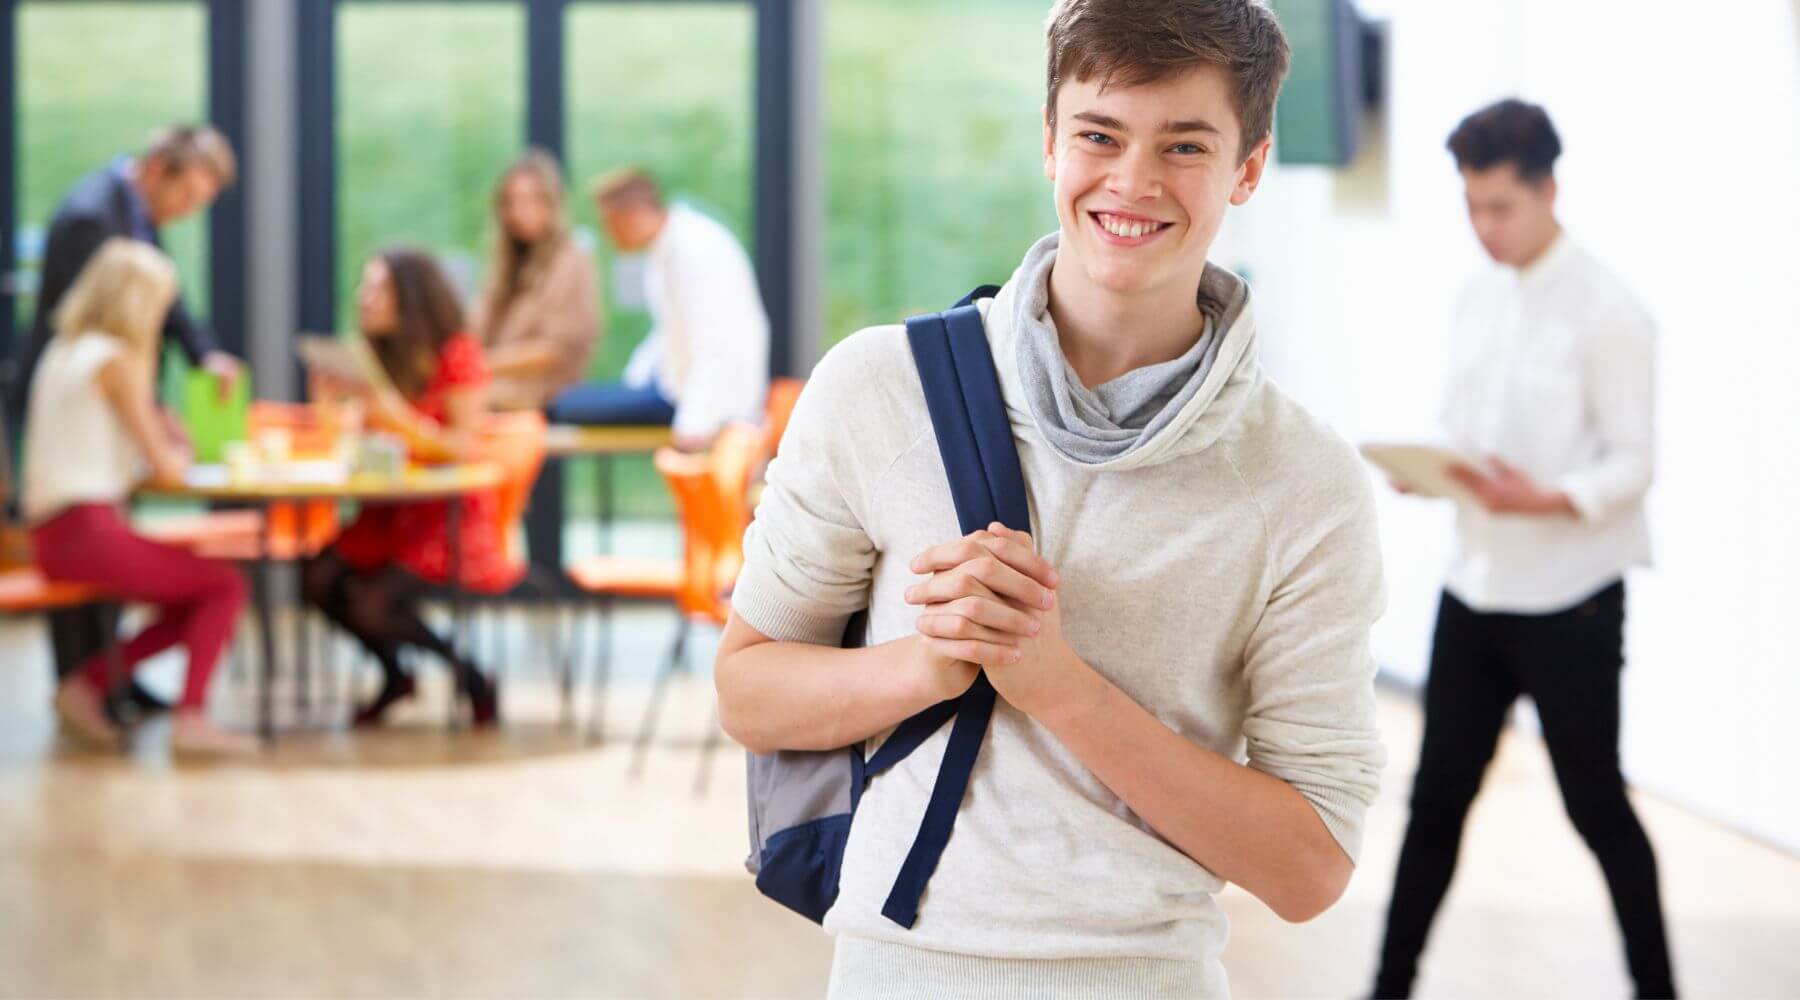 Male nursing student smiling with backpack.